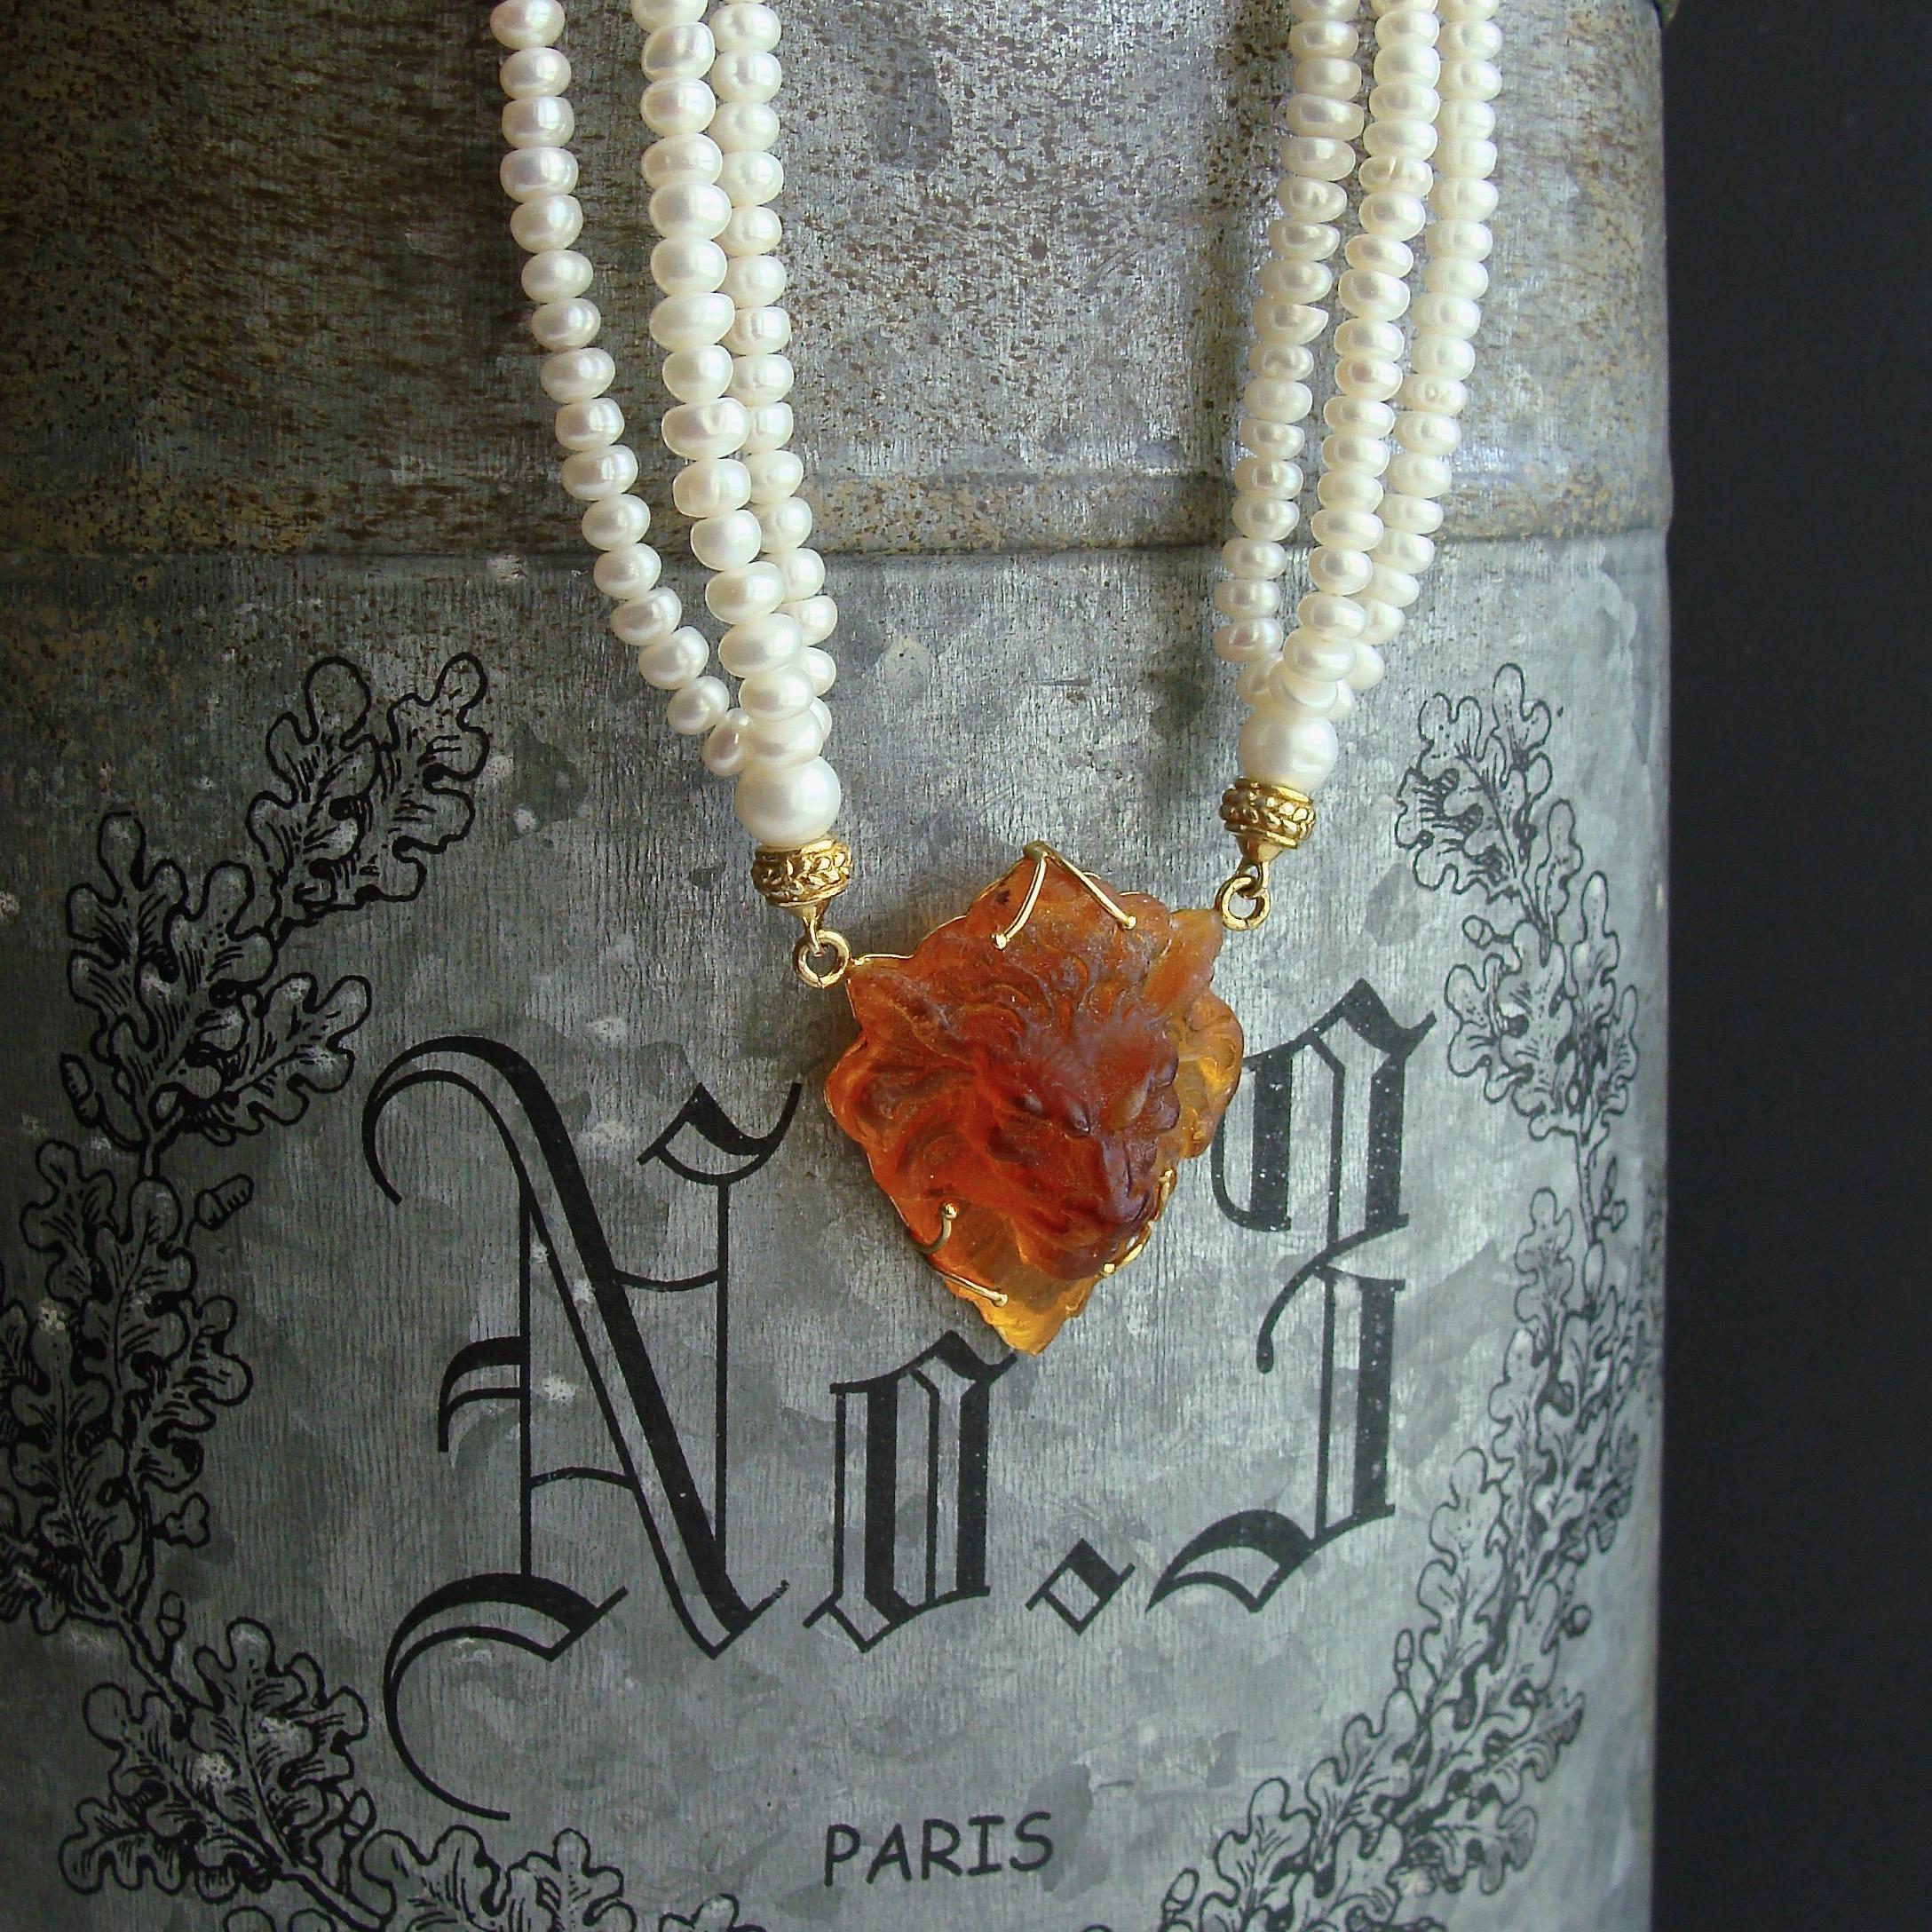 A remarkable Venetian glass intaglio featuring a three dimensional lion in a whiskey quartz coloring, has been married to a triple strand of creamy white small button pearls.  This rich and elegant combination is highlighted with a gold vermeil